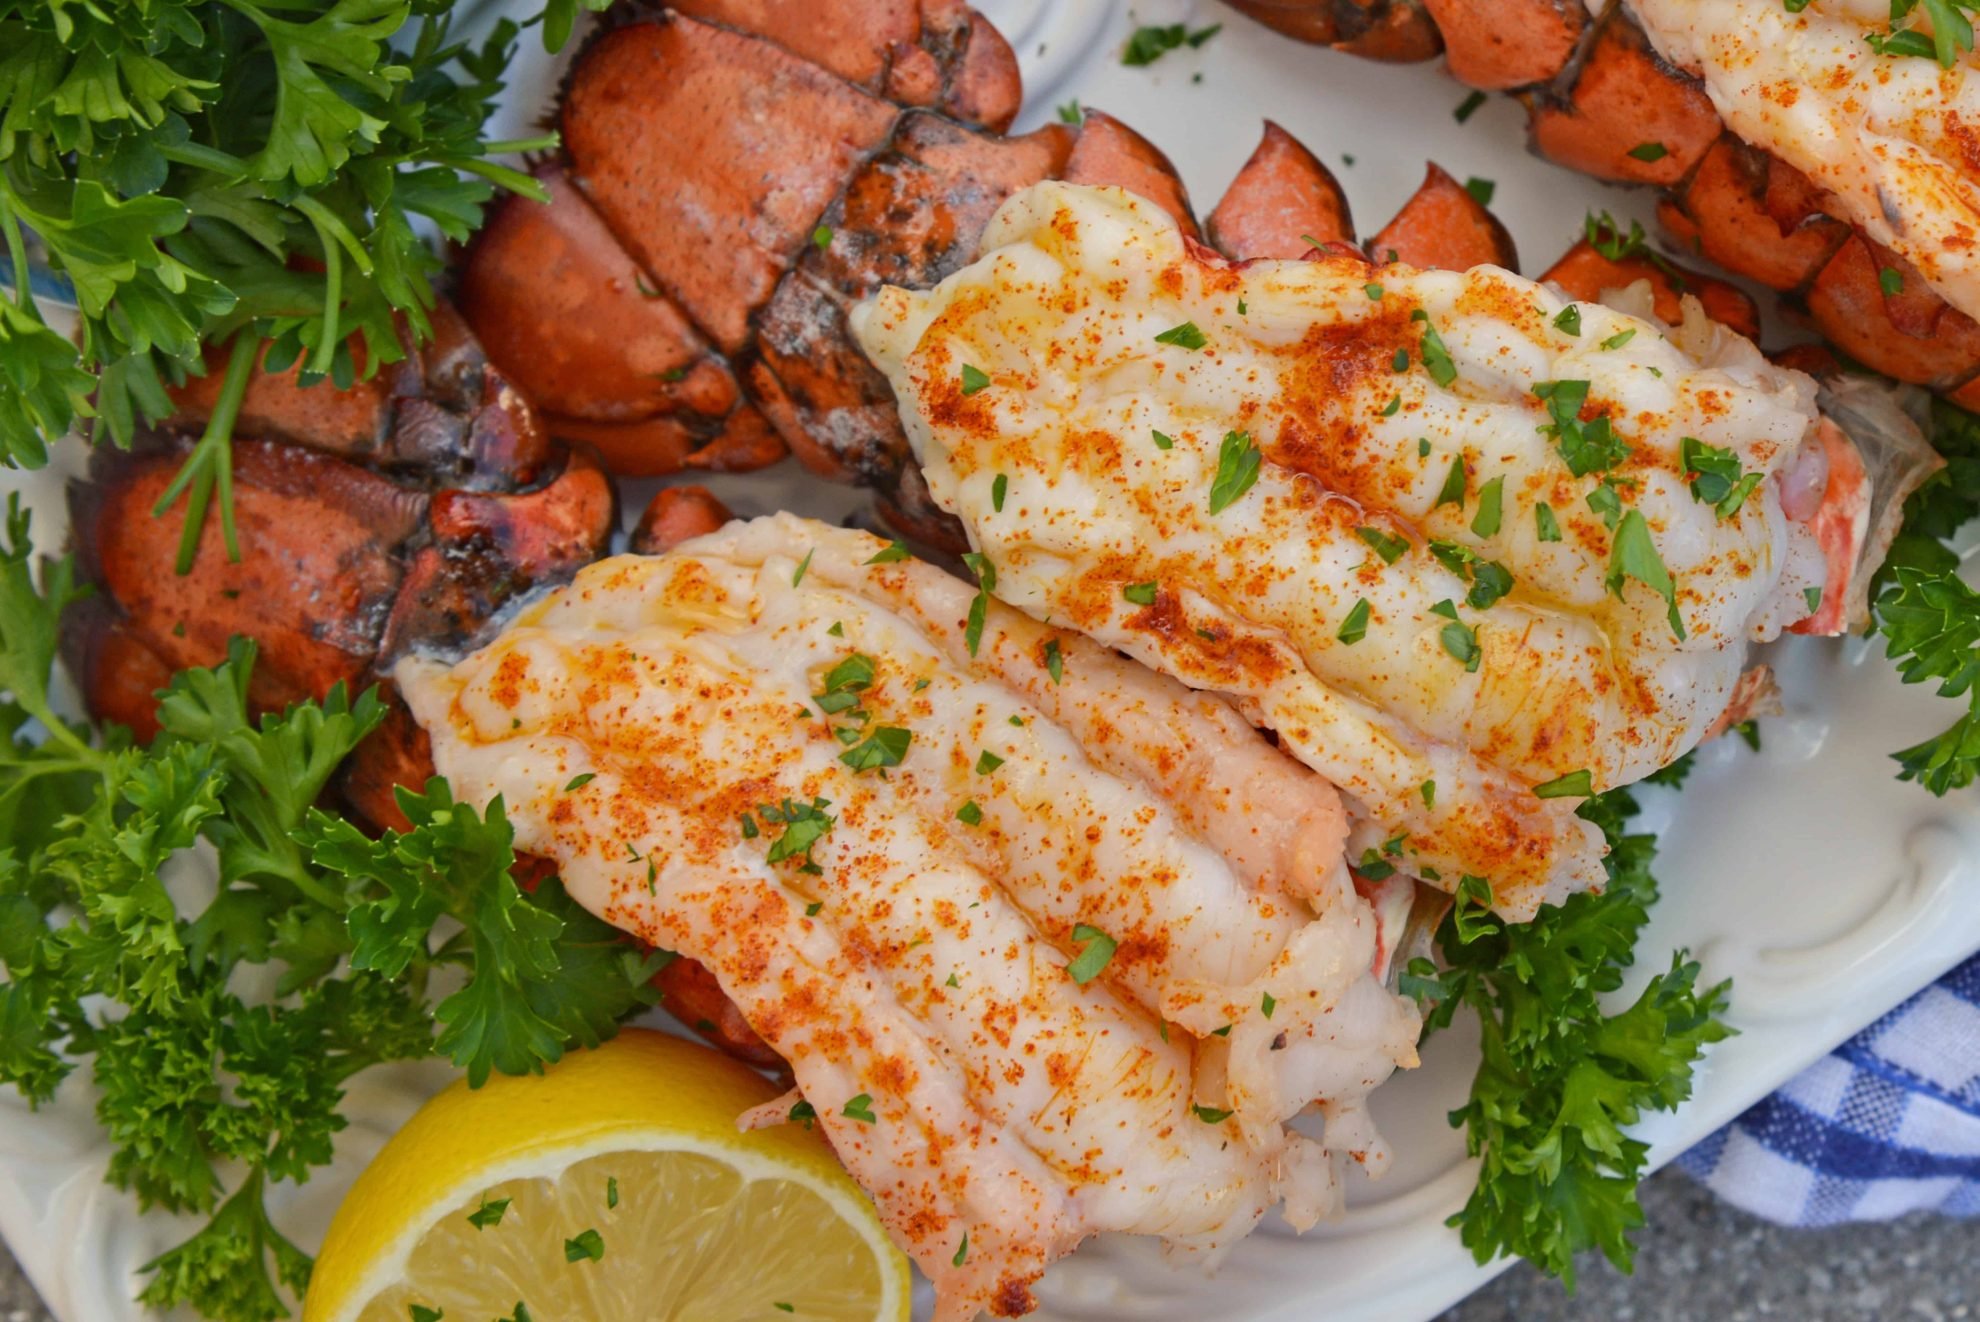 Broiled Lobster Tails with Lemon Butter brings the feel of a fancy restaurant right to the comfort of your own home and is ready in just minutes! #howtocooklobstertails #broiledlobstertails www.savoryexperiments.com